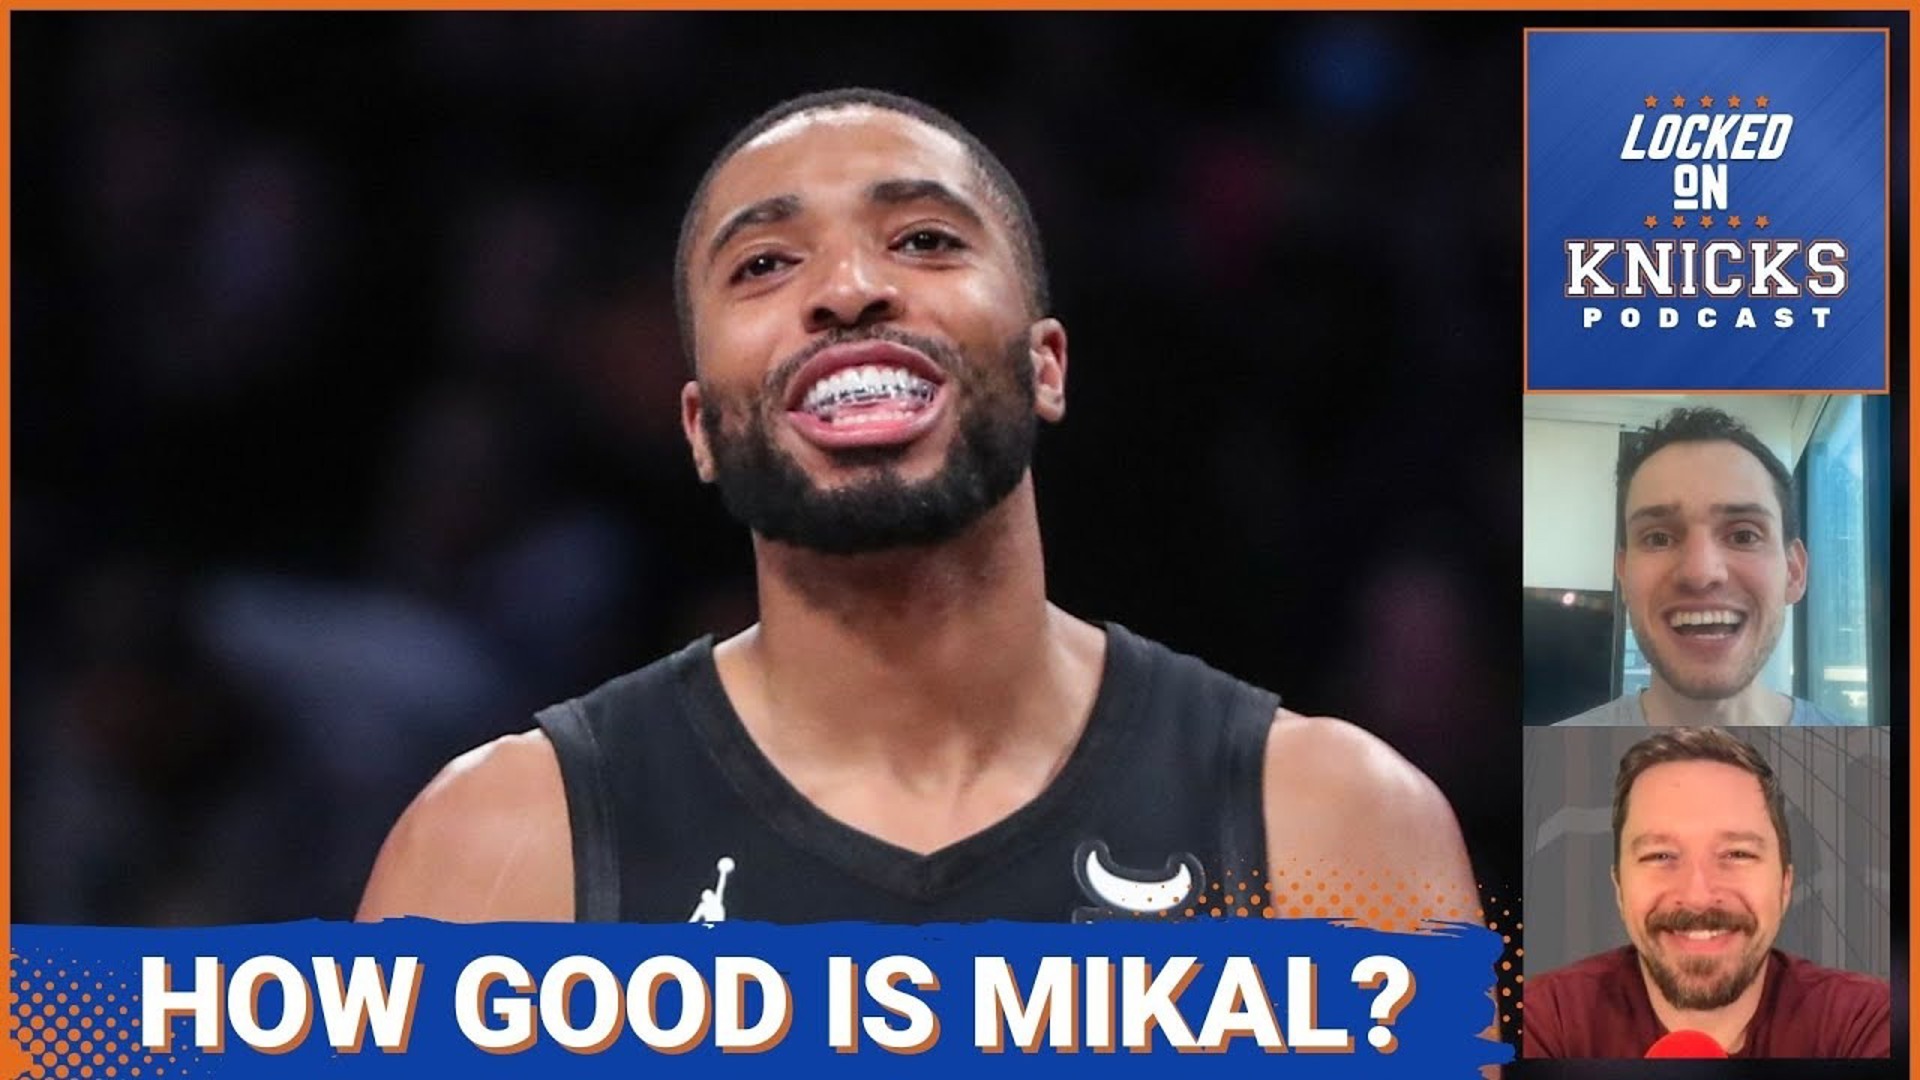 Gavin Schall is joined by Locked On Nets co-host Adam Armbrecht to discuss what kind of player the Knicks are getting in Mikal Bridges.